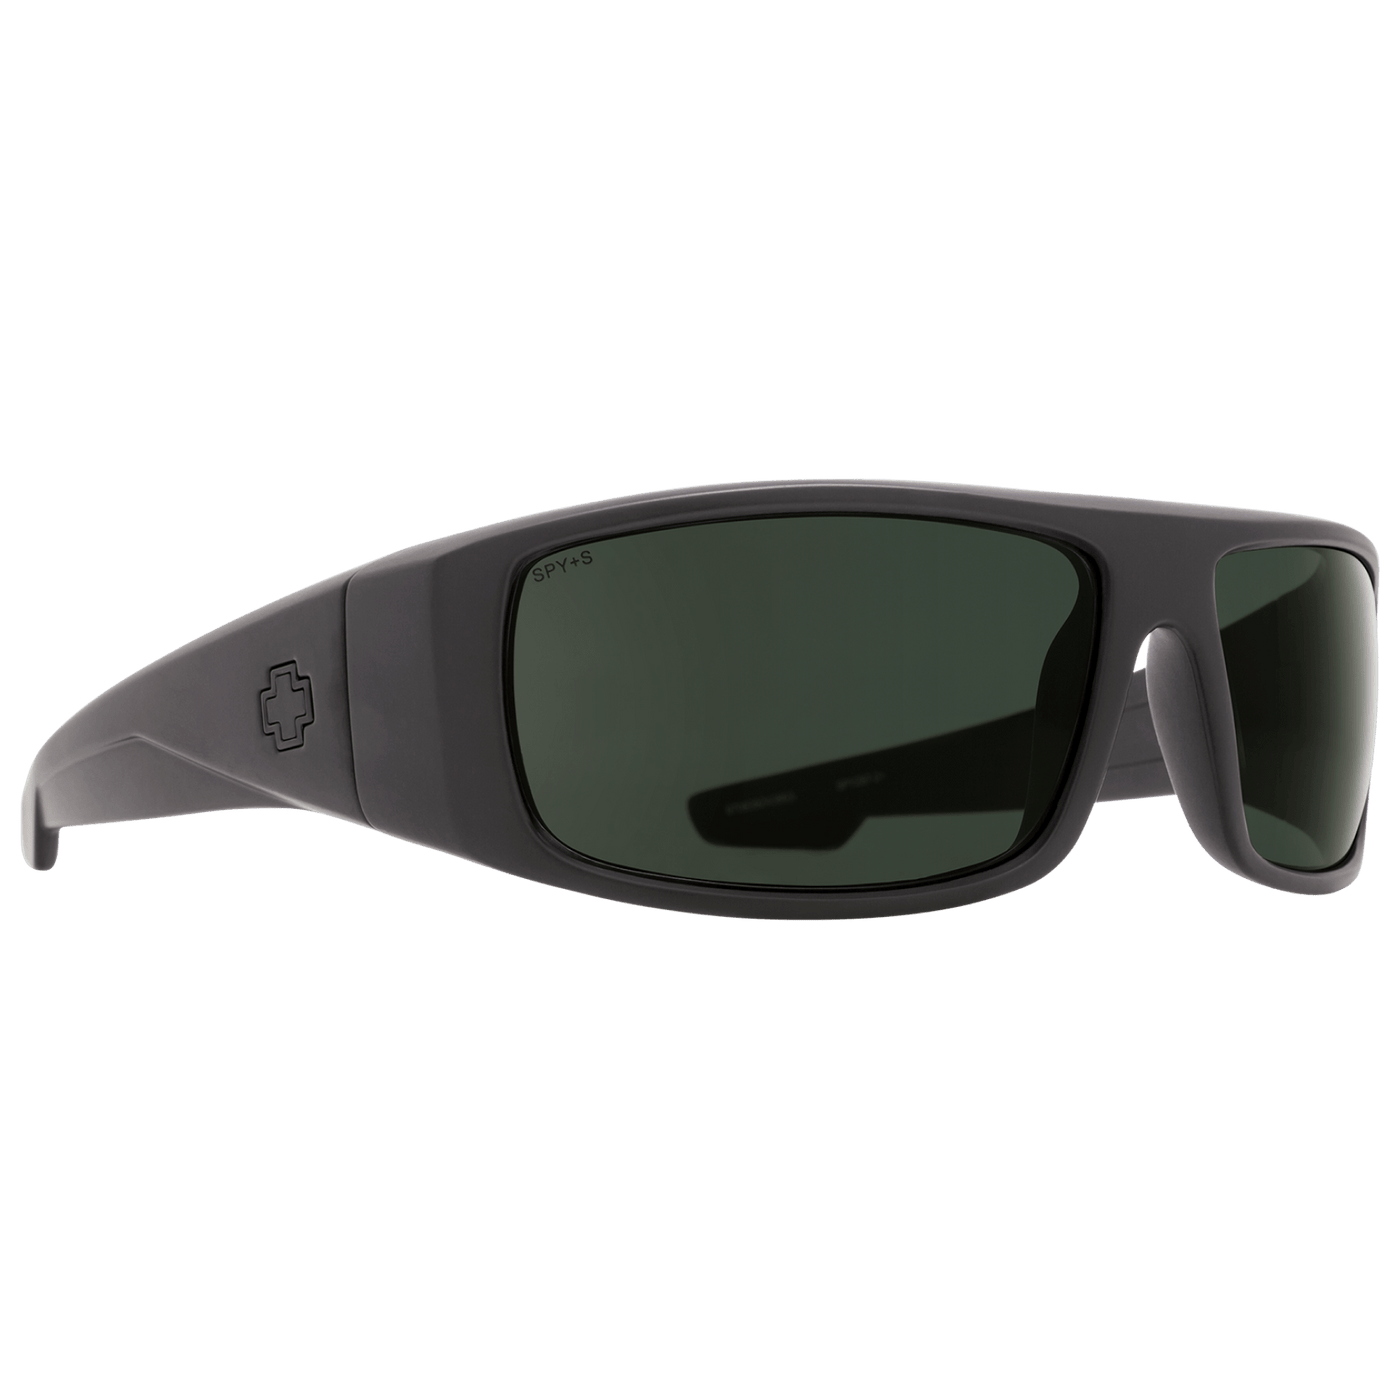 SPY LOGAN ANSI Approved Sunglasses, Happy Lens - Matte Black 8Lines Shop - Fast Shipping